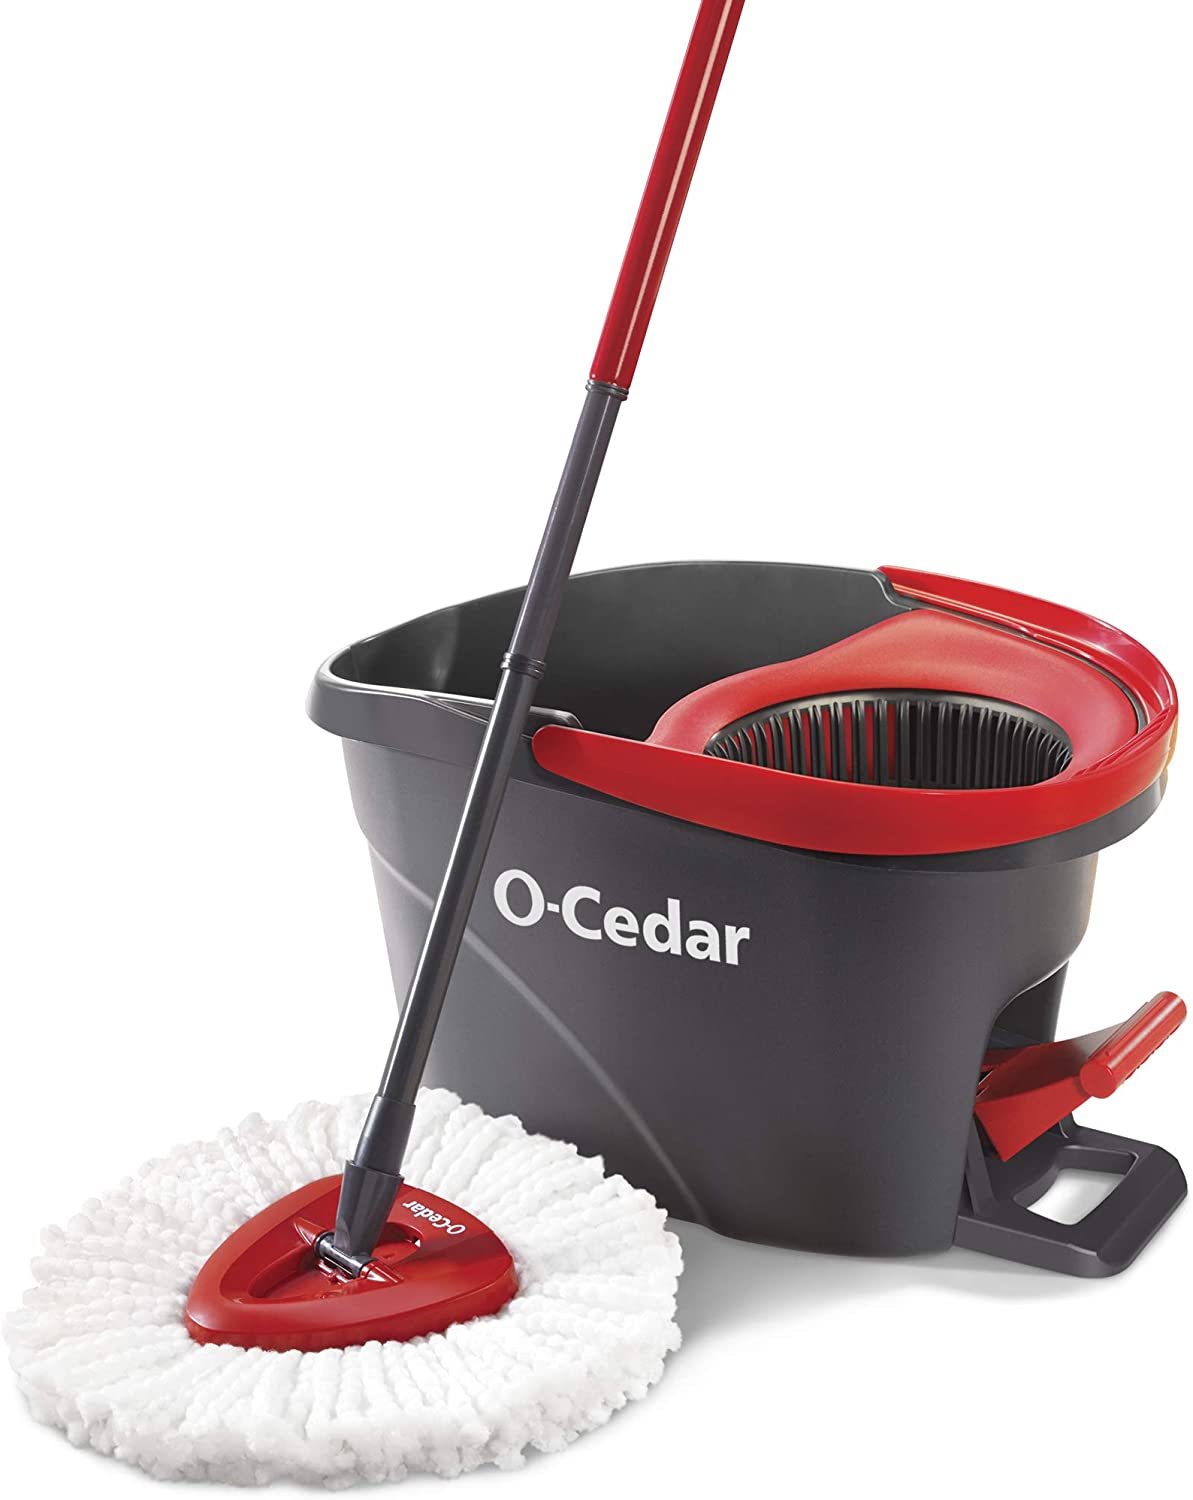 O-Cedar EasyWring Microfiber Spin Mop, Bucket Floor Cleaning System, Red, Gray 16